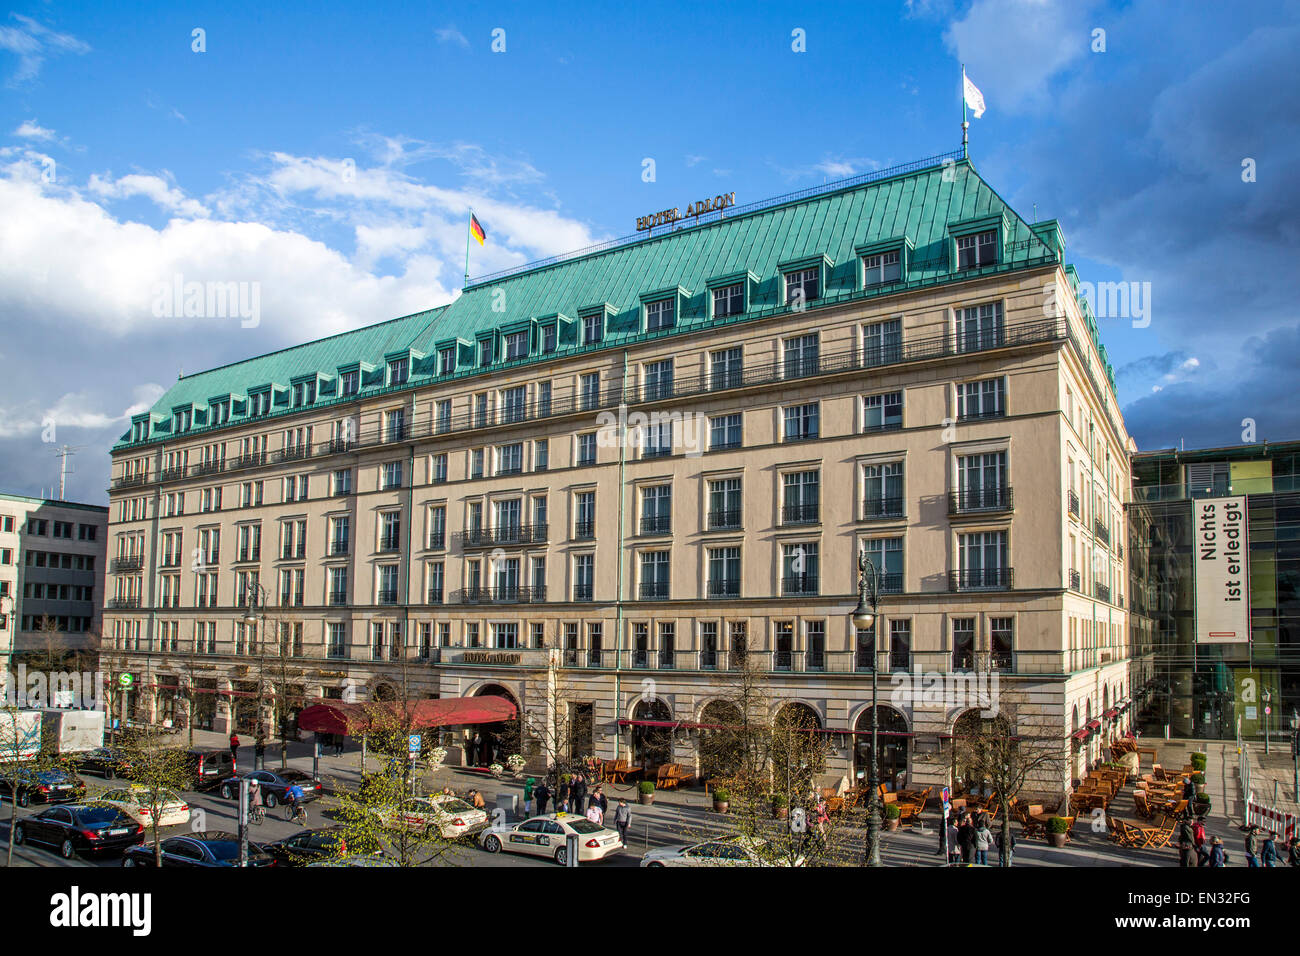 Hotel Adlon Hotel High Resolution Stock Photography and Images - Alamy